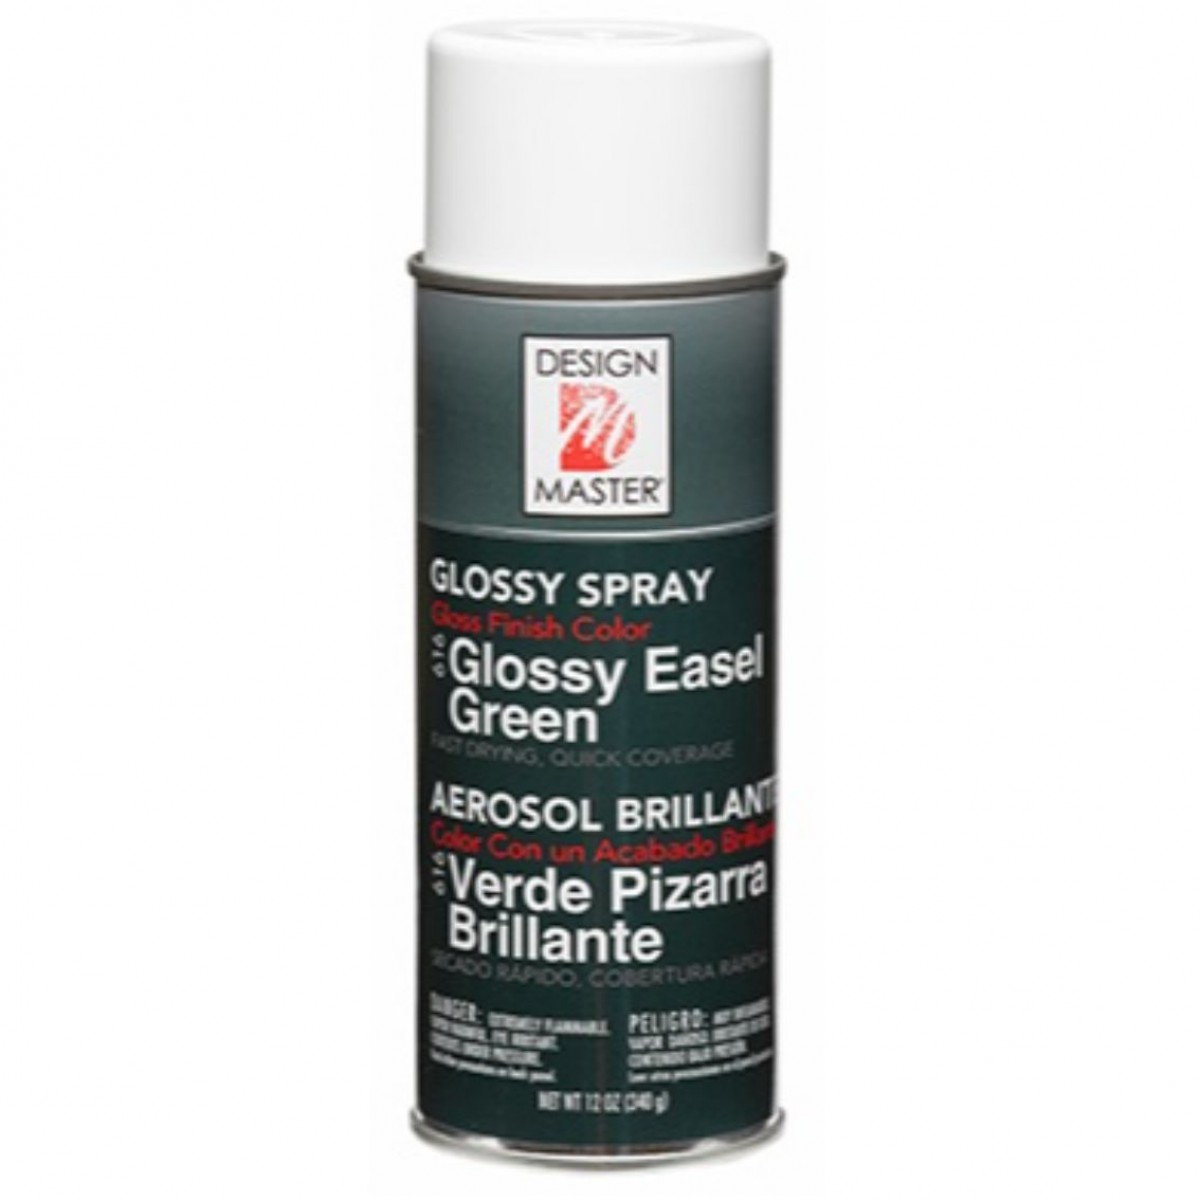 616 Glossy Easel Green DM Colour Spray Paint - 1 No